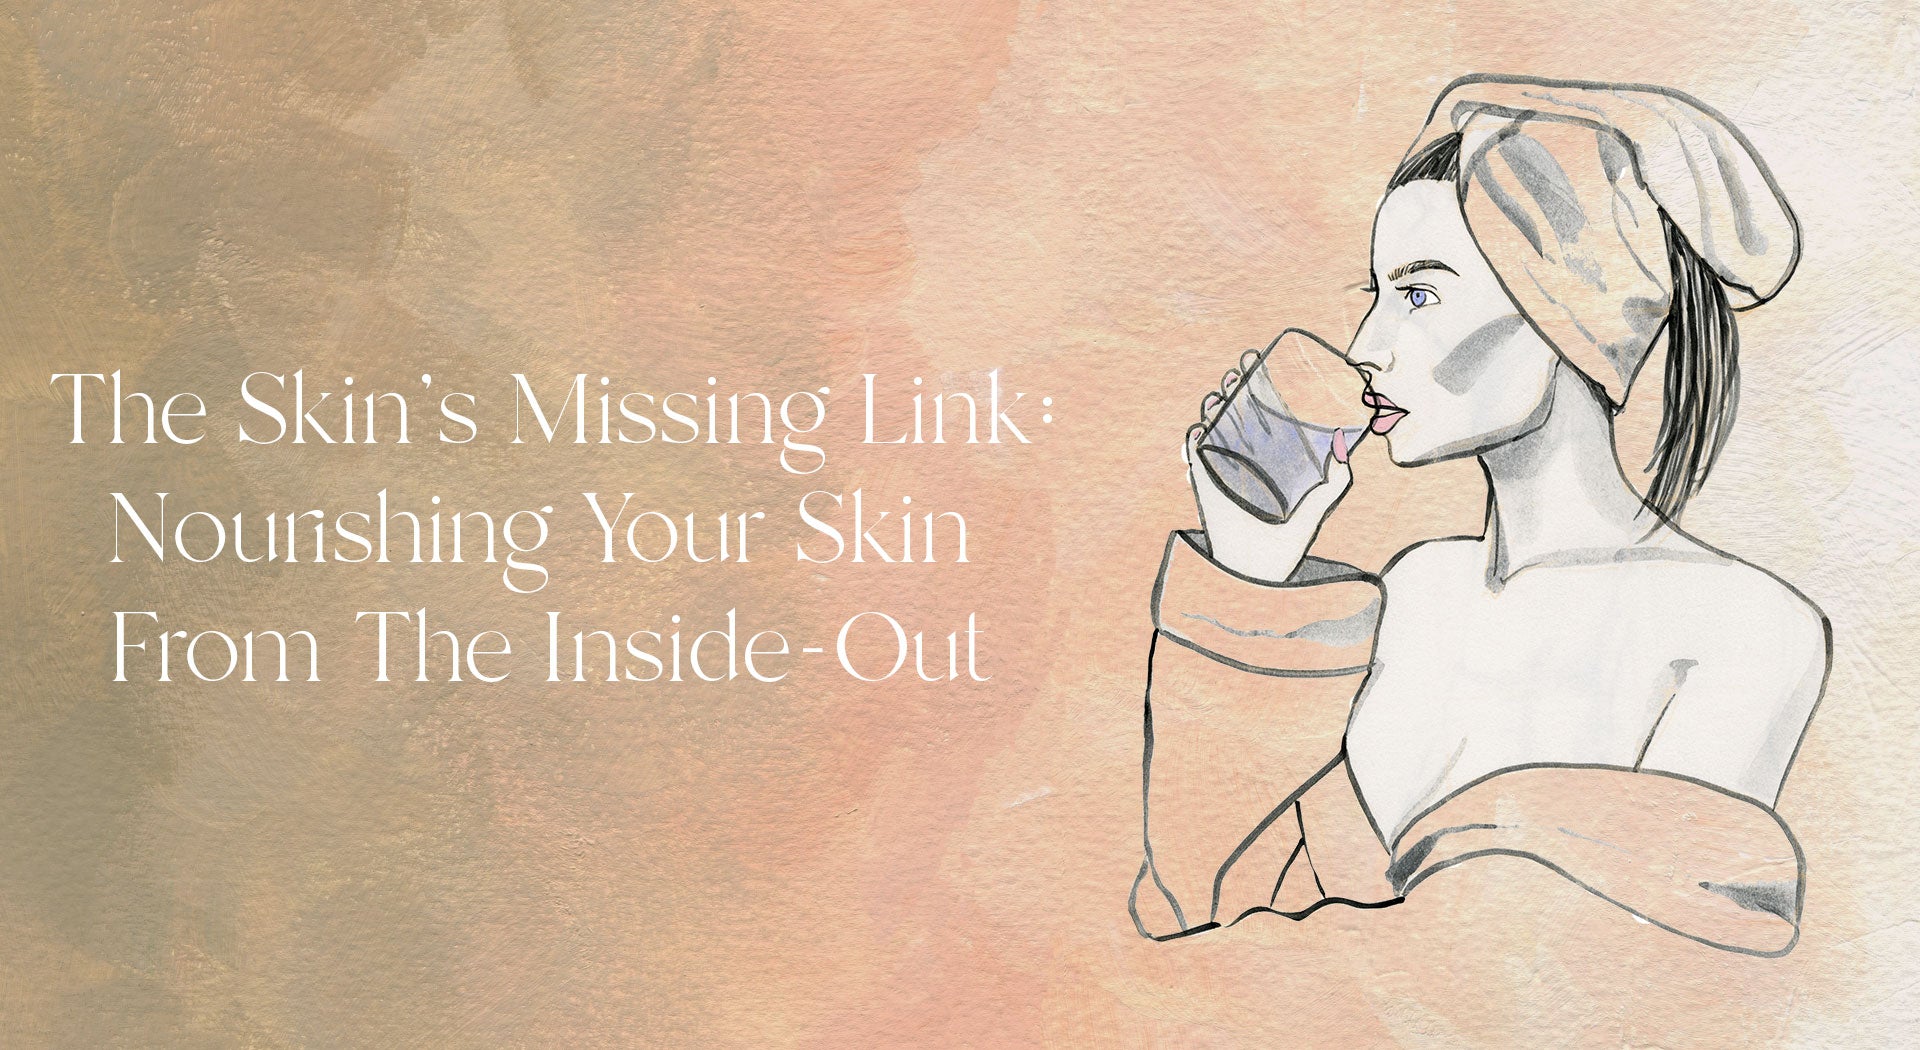 The Skin's Missing Link: Nourishing Your Skin From Inside-Out